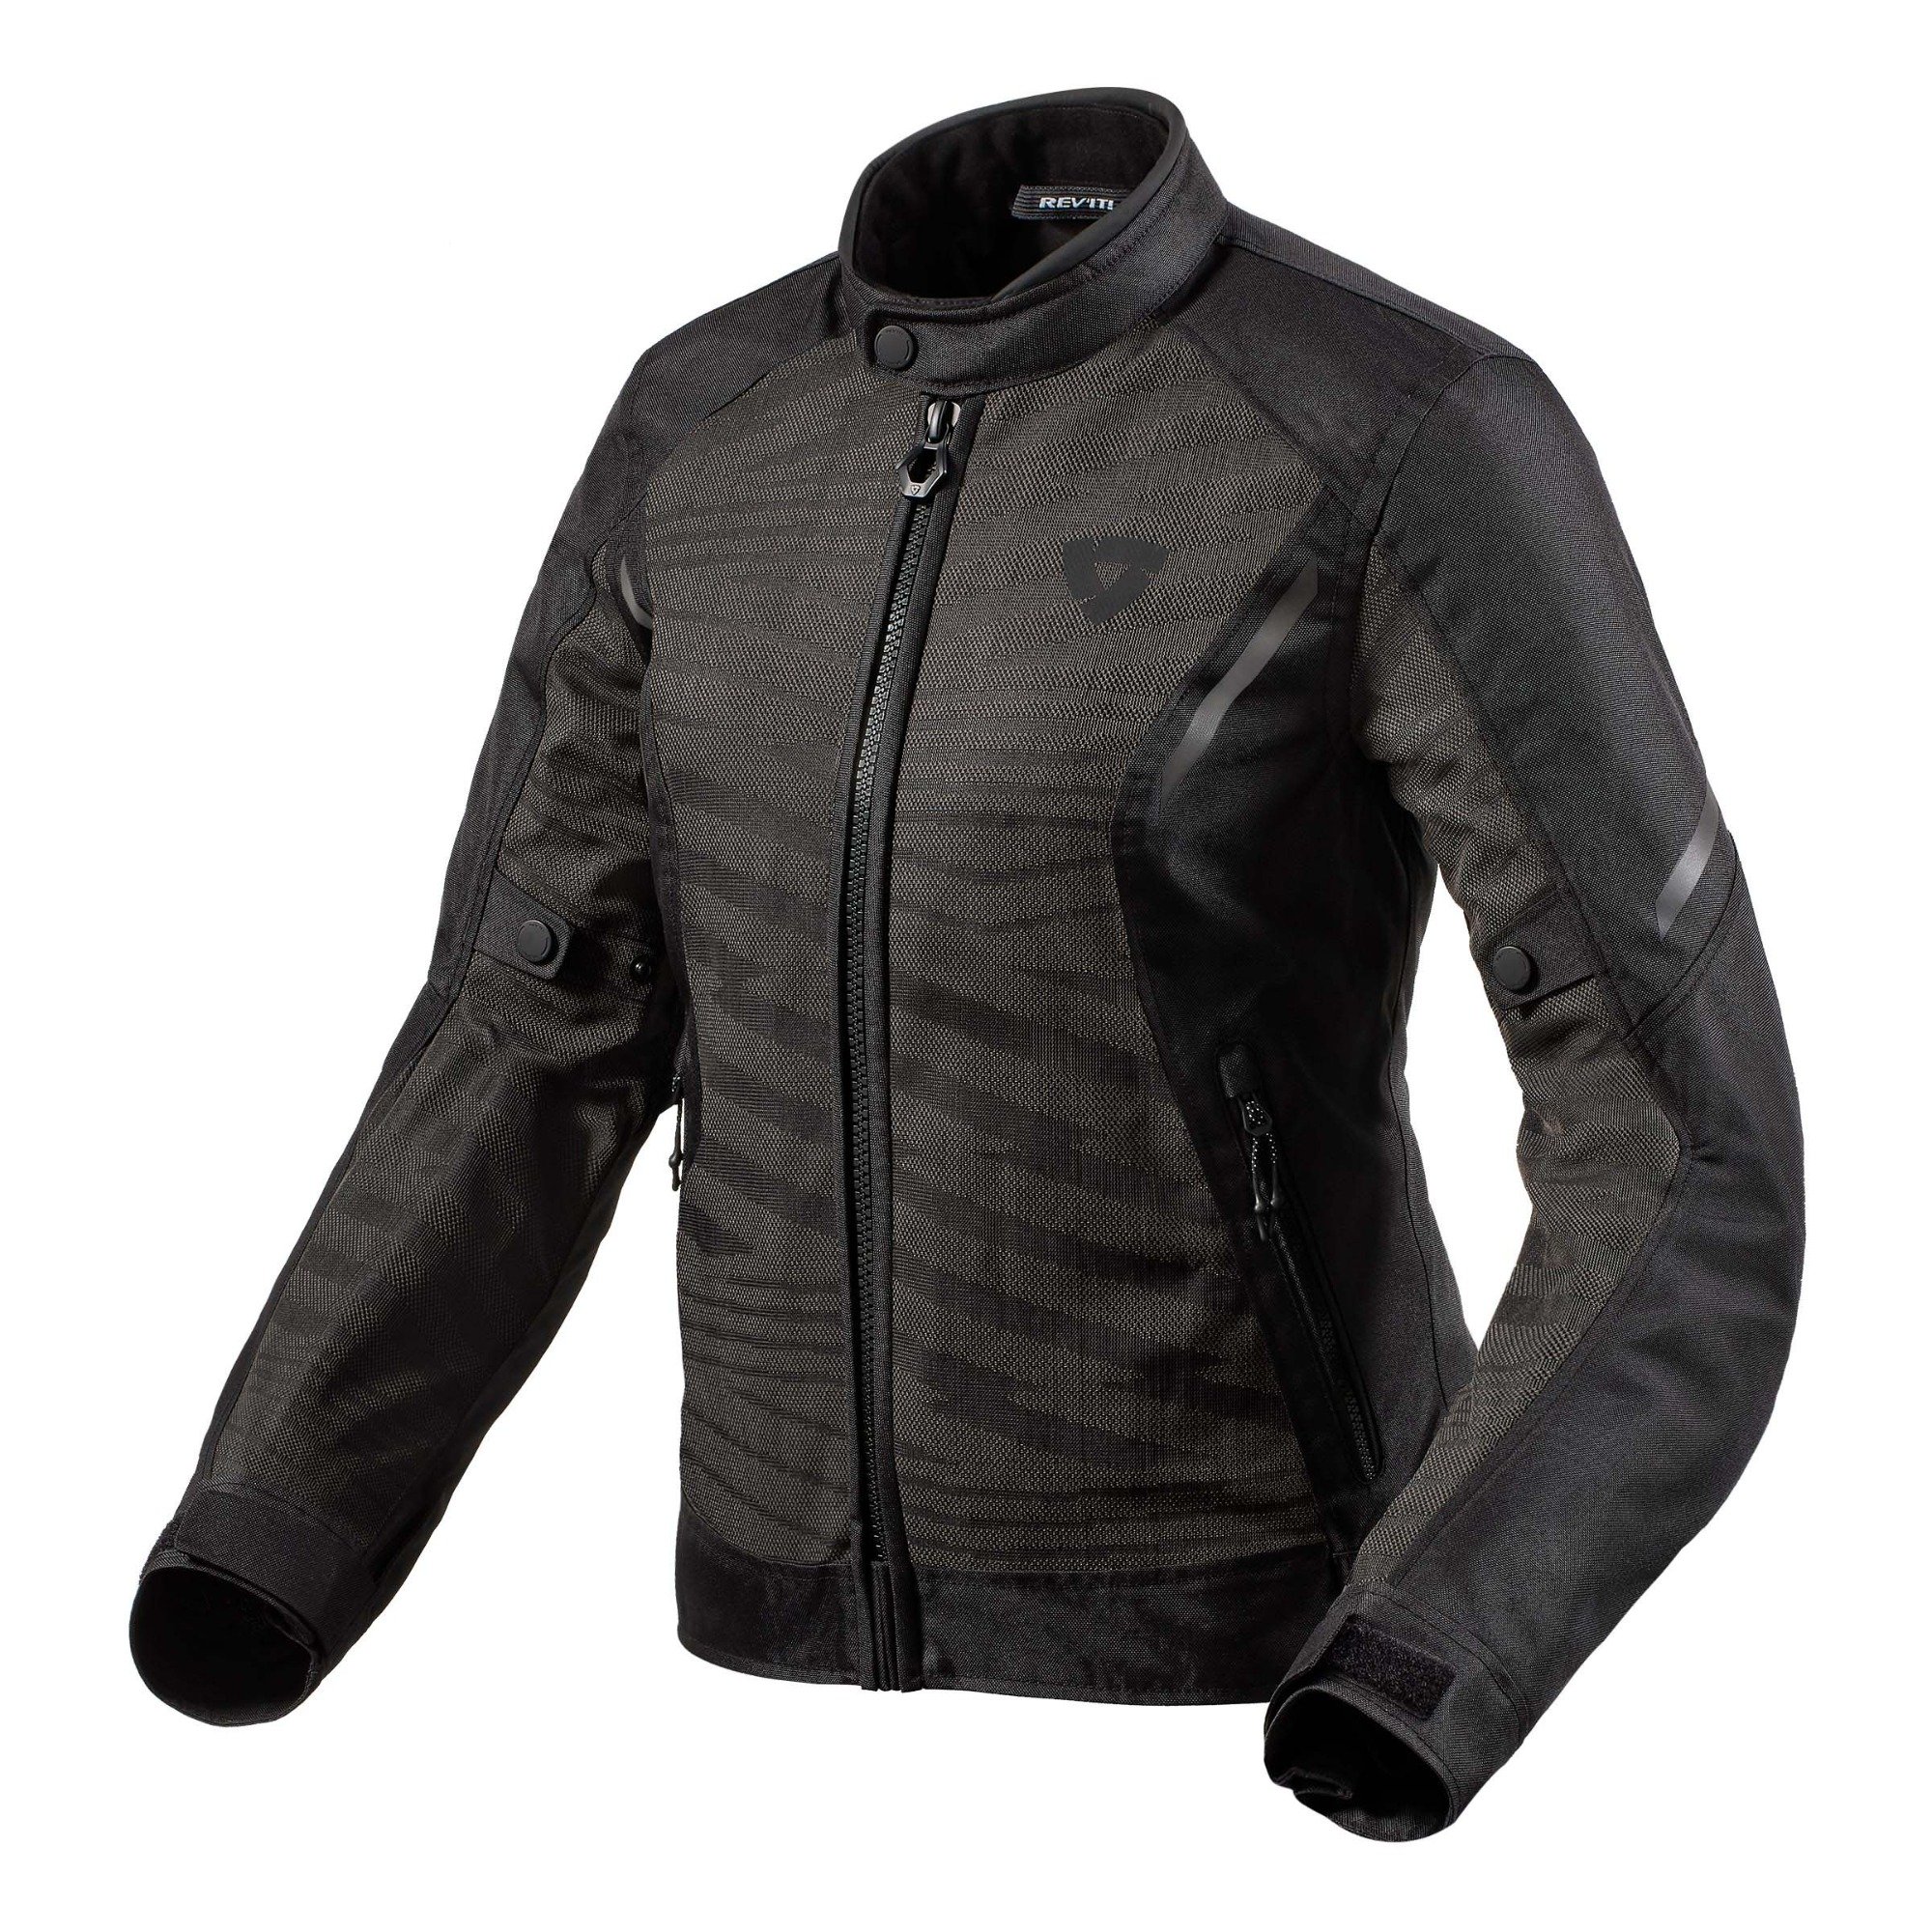 Image of REV'IT! Torque 2 H2O Jacket Lady Black Anthracite Size 42 ID 8700001345538